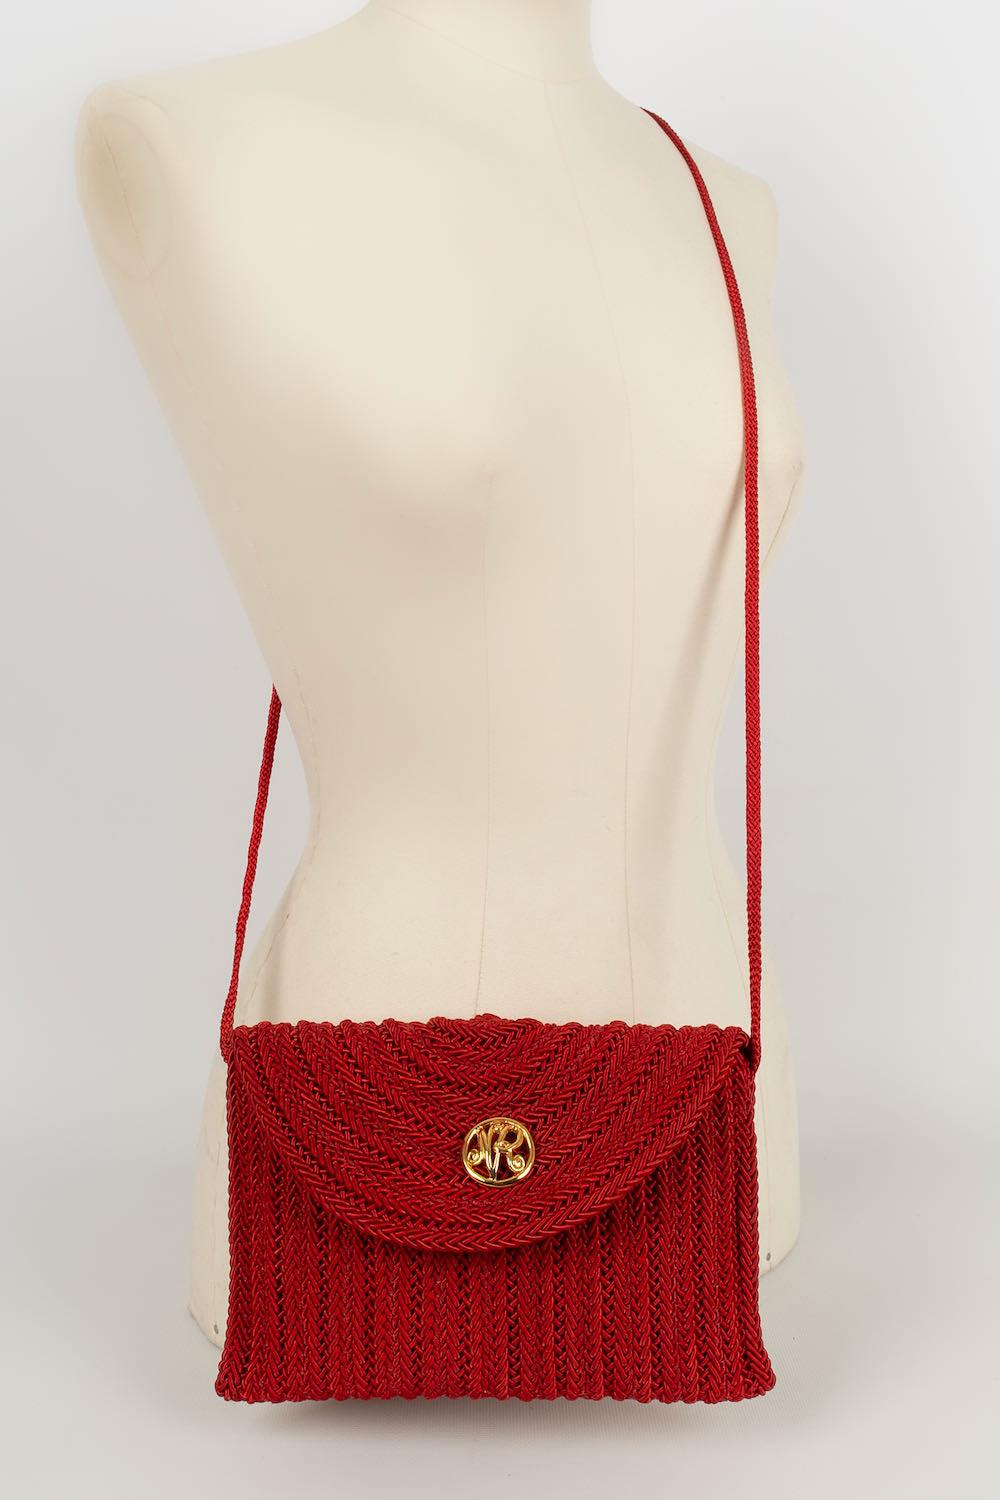 Nina Ricci Red Passementerie Bag For Sale 3